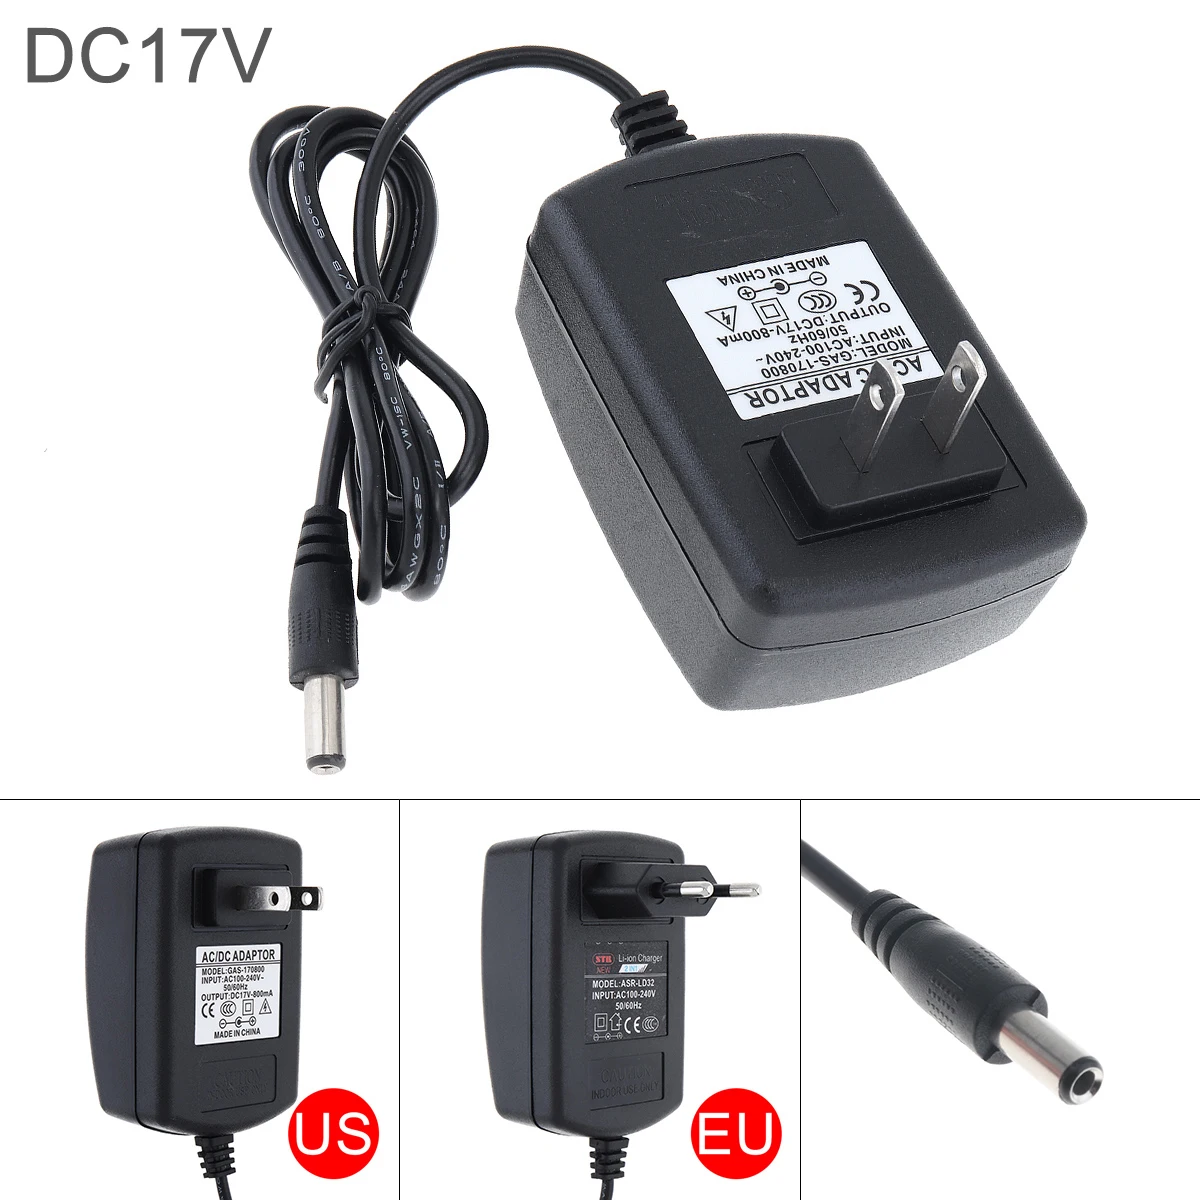 80cm Universal DC 16.8-17V Lithium Battery Rechargeable Charger 100-240V Power Supply for Lithium Electrical Drill Screwdriver lp e17 lpe17 rechargeable battery charger for canon eos rebel t7i t6i t6s sl2 eos m6 m5 m3 77d 750d 760d 800d